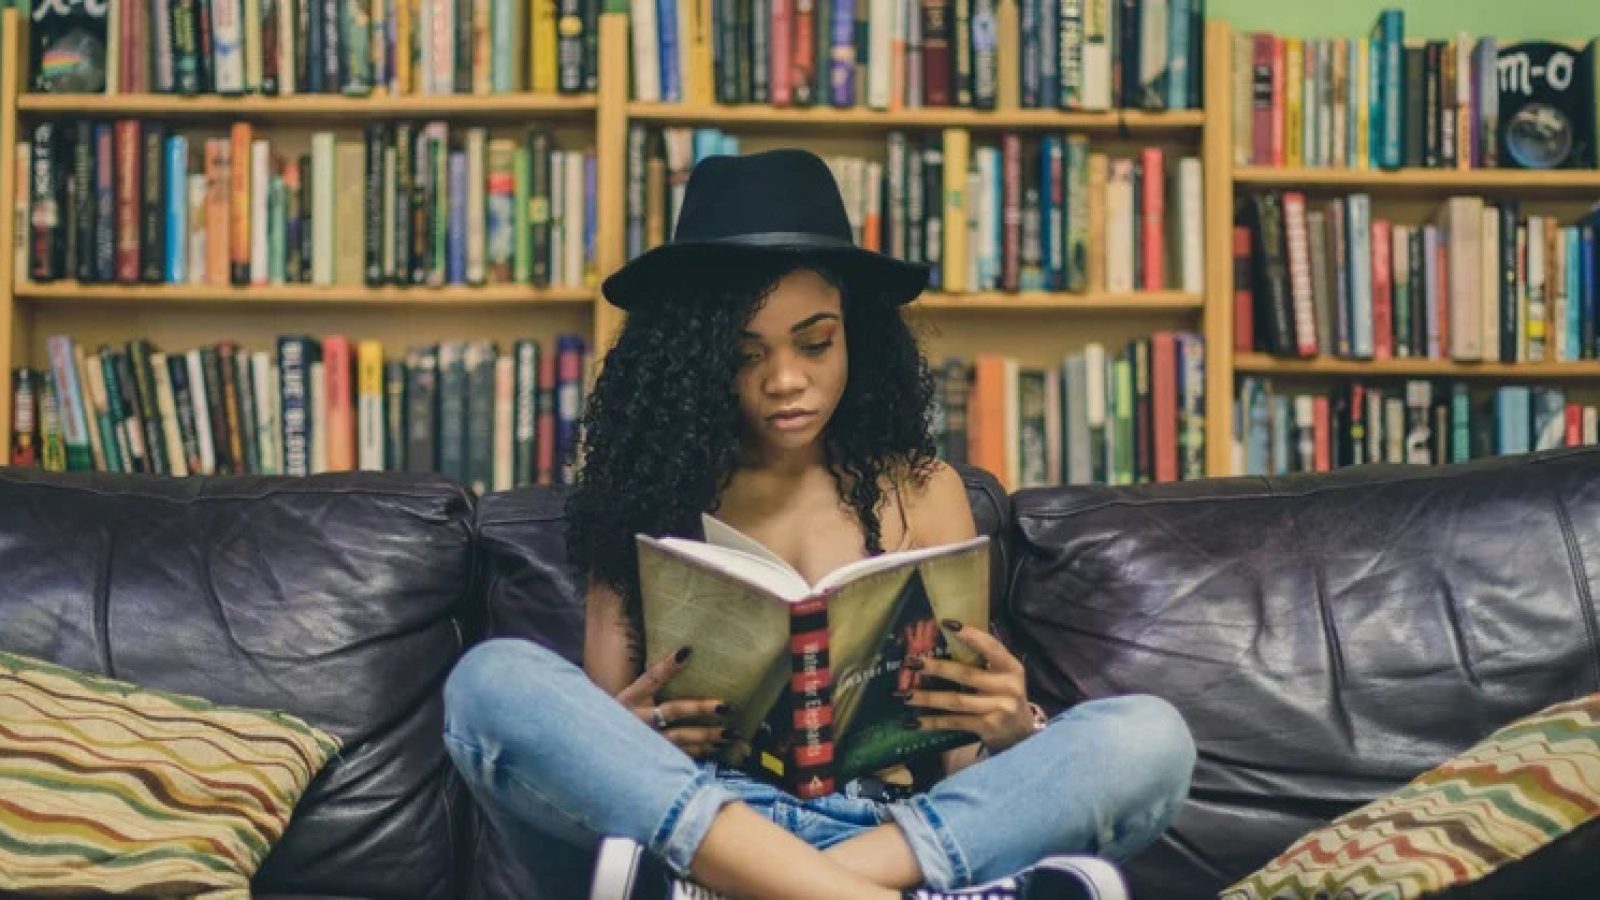 An image of a student reading a book.